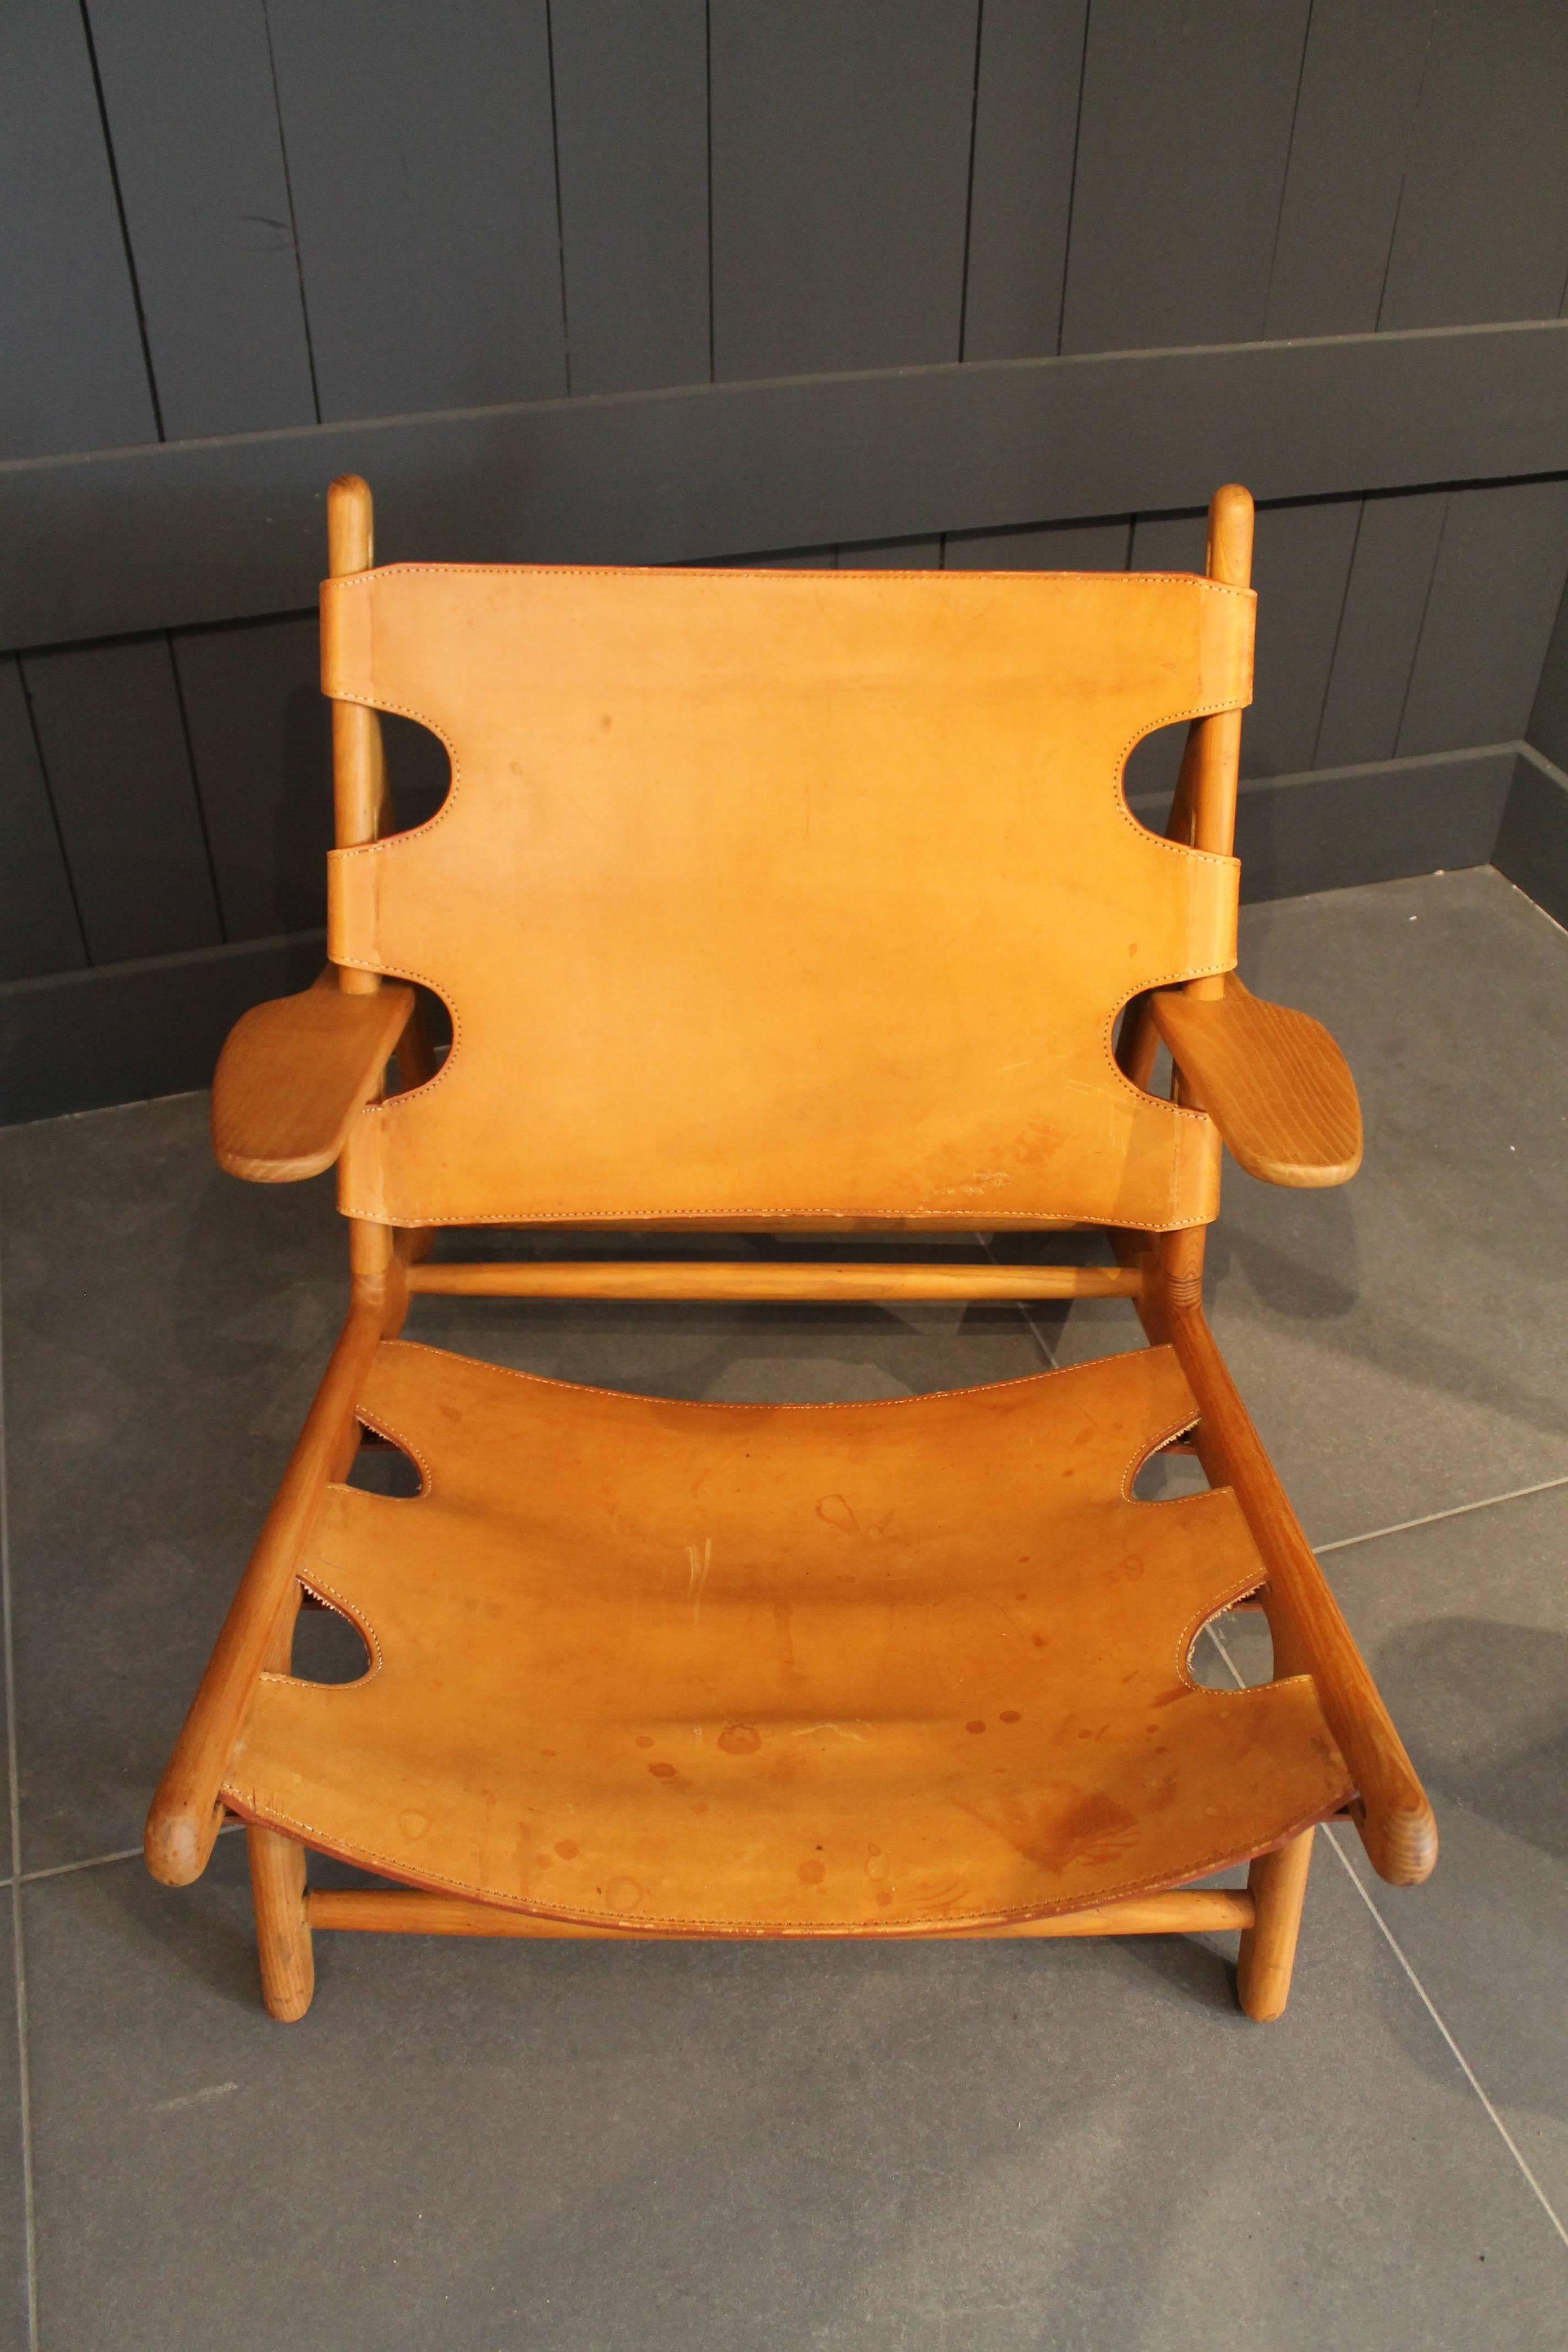 A chair of Børge Mogensen hunting lounge chairs for Fredericia, Denmark. Designed in 1950 for an exhibition of the Copenhagen cabinetmakers' guild.

Among the great mid-20th century Danish furniture designers, Børge Mogensen distinguished himself